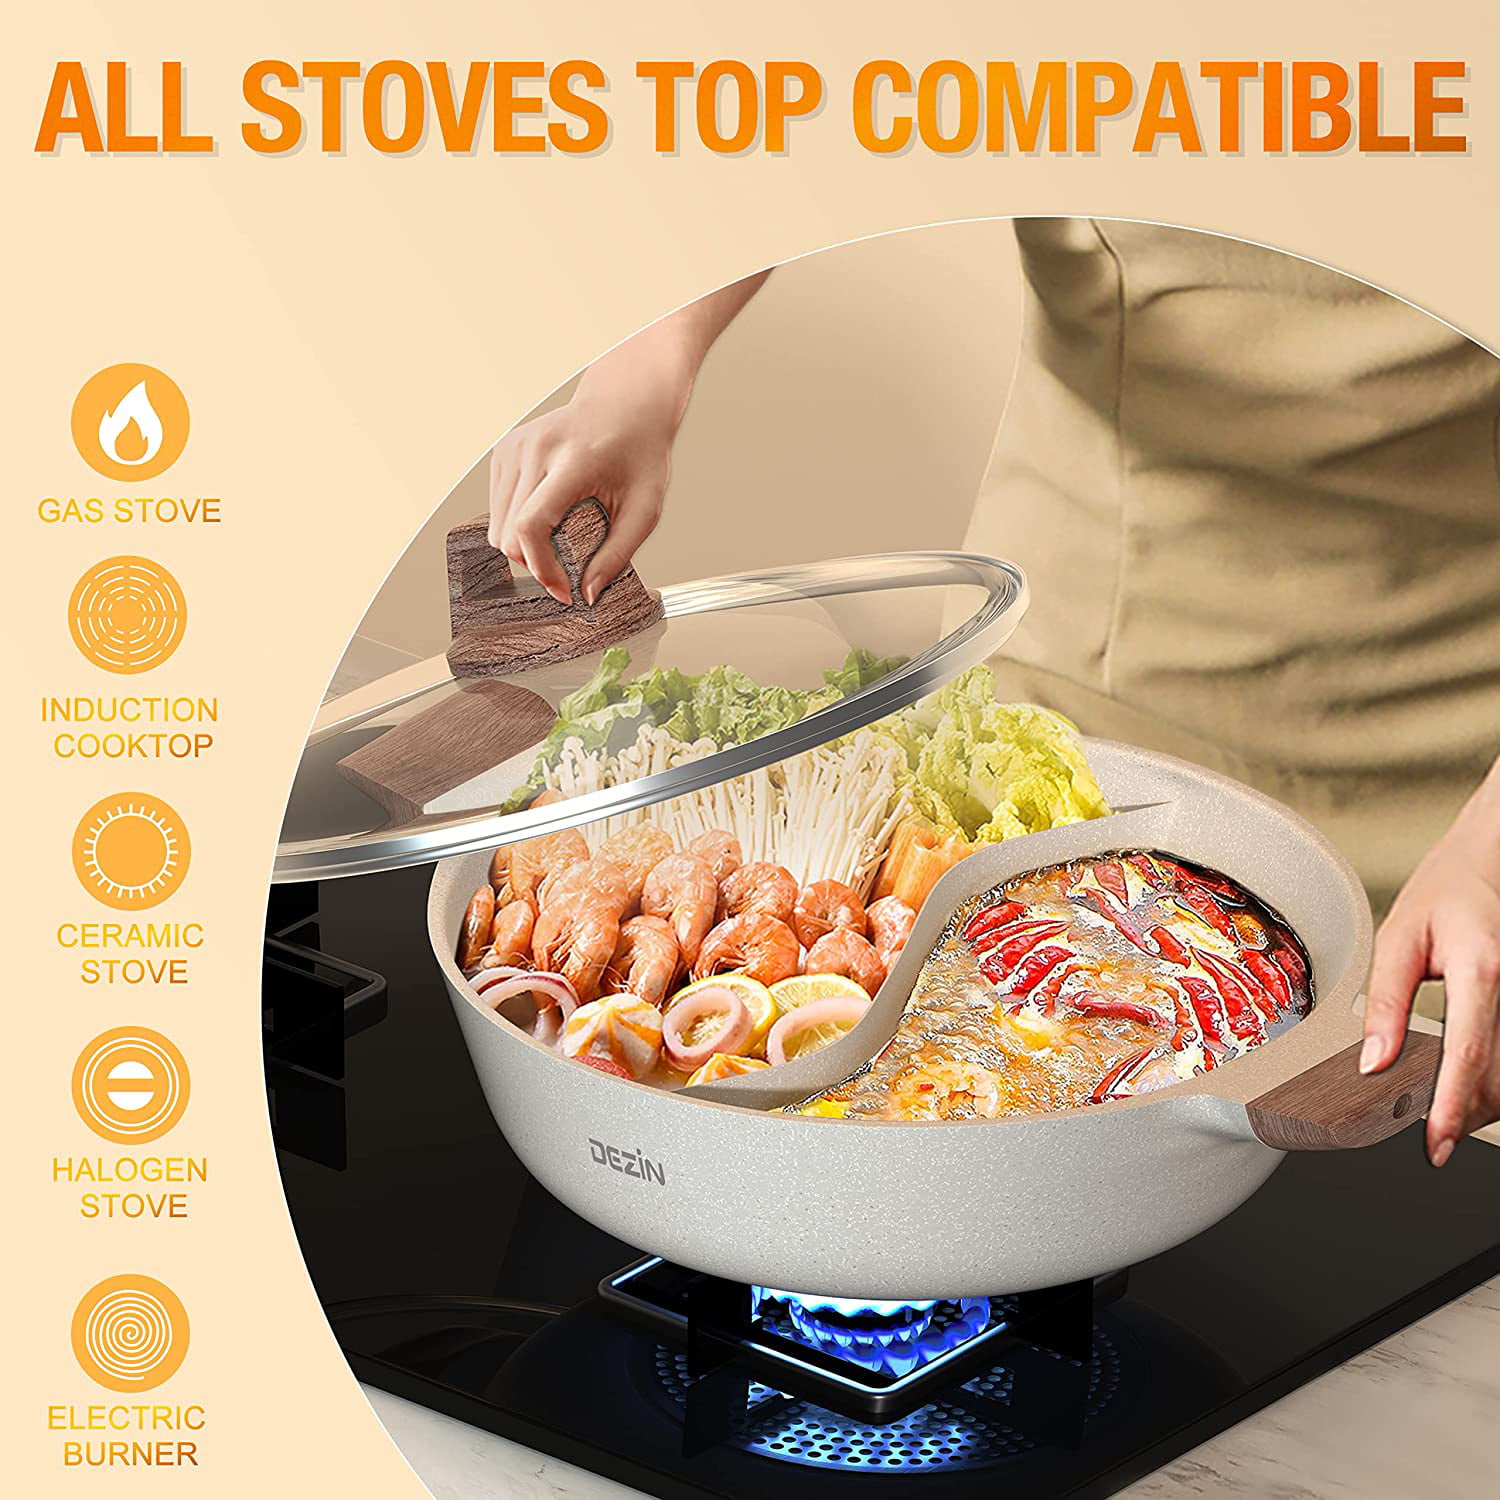 TONSNY 5qt Stainless Steel Dual Sided Hot Pot with Divider for Induction Cooktop GAS Stove Kitchen Cooker, 12 inch Double-Flavor Hotpot Pot Shabu